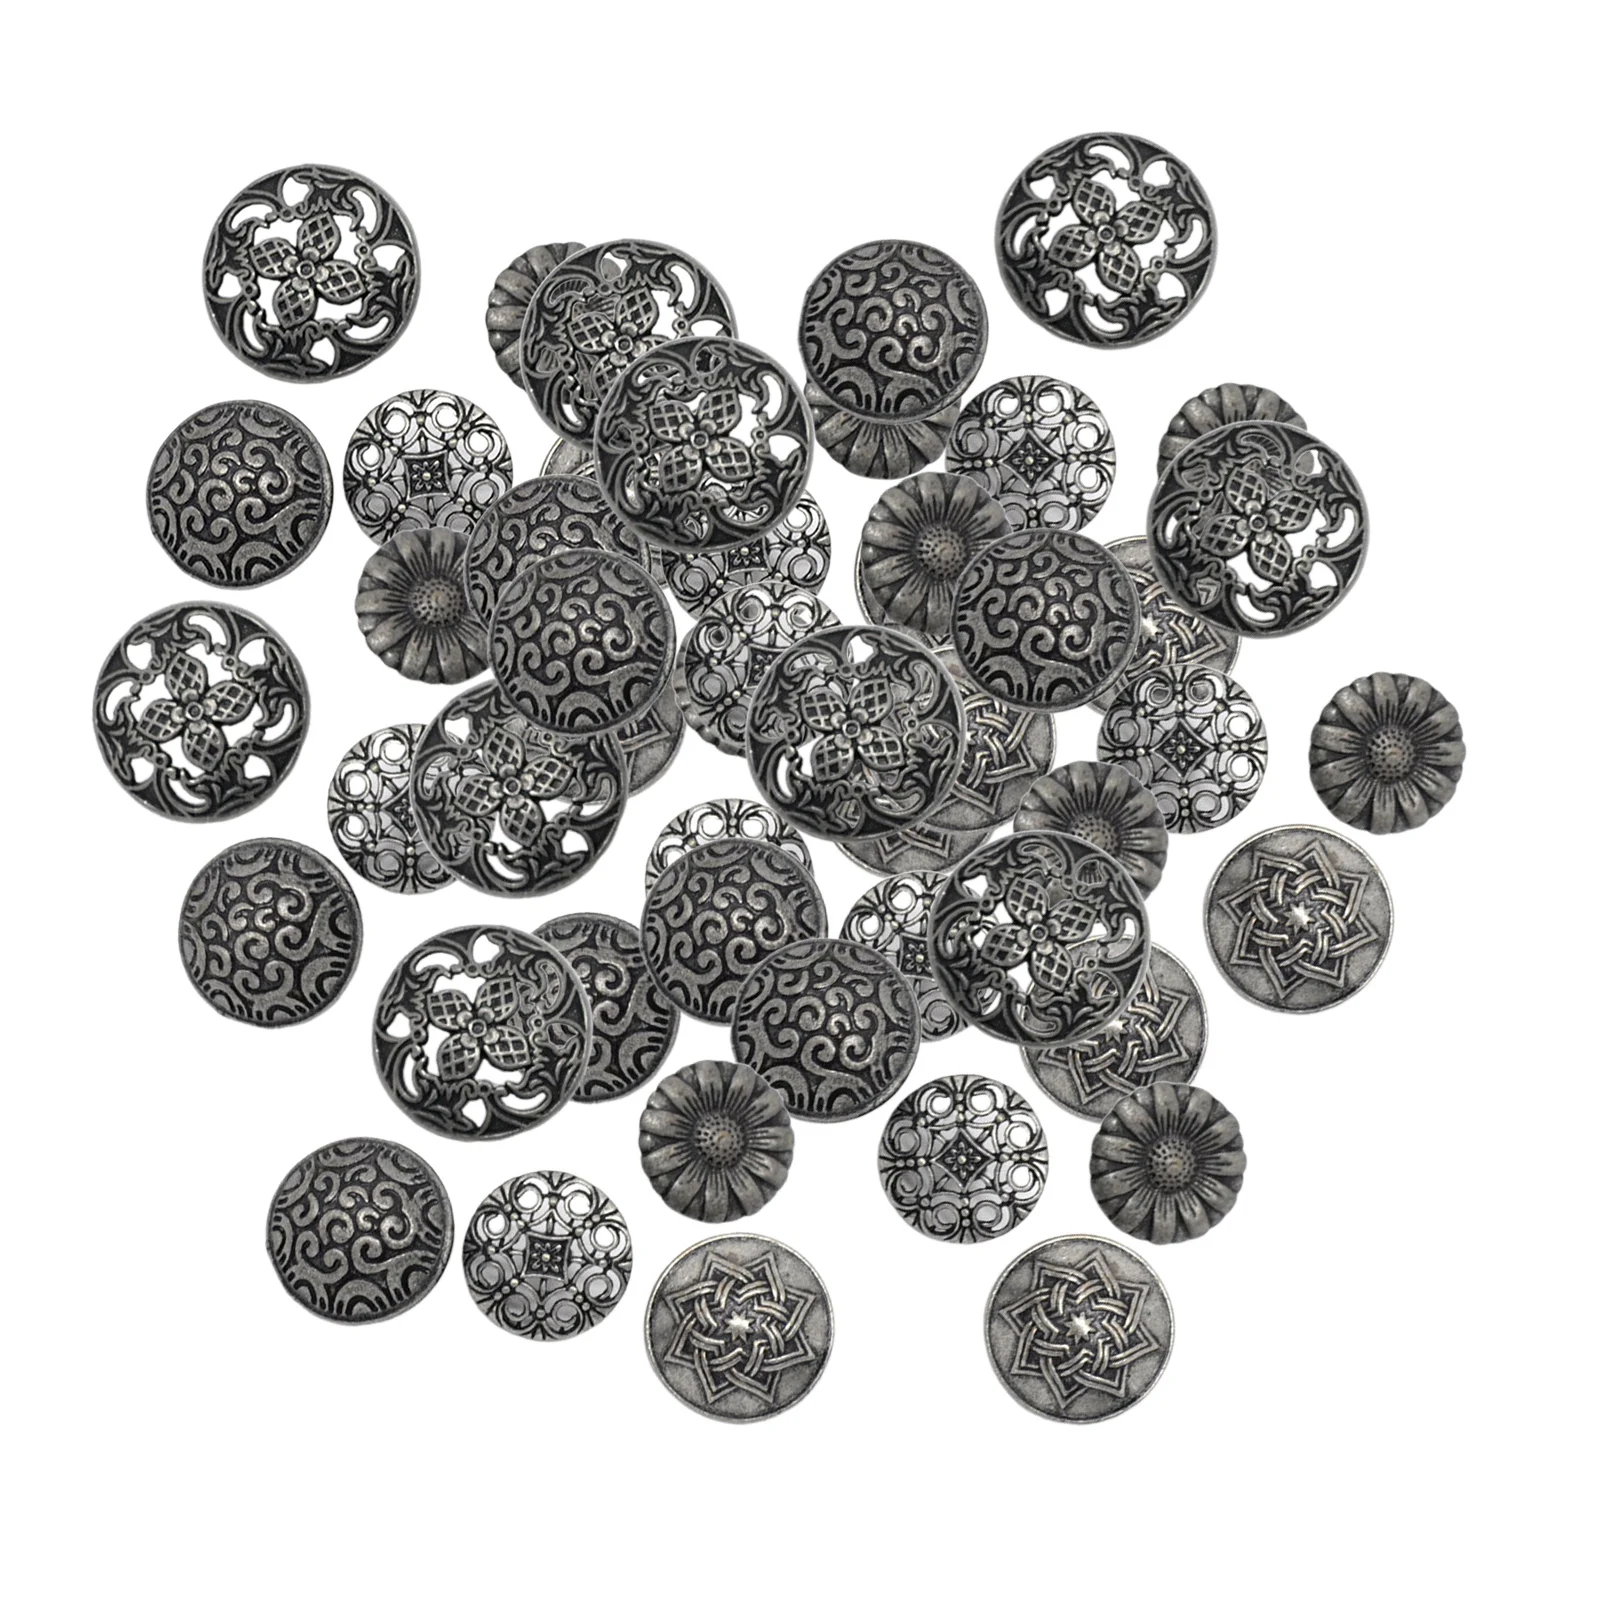 50 Pieces Round Mixed Antique Silver Vintage Metal Buttons Flower Decorative for DIY Crafts Sewing Crochet Decor Knitting